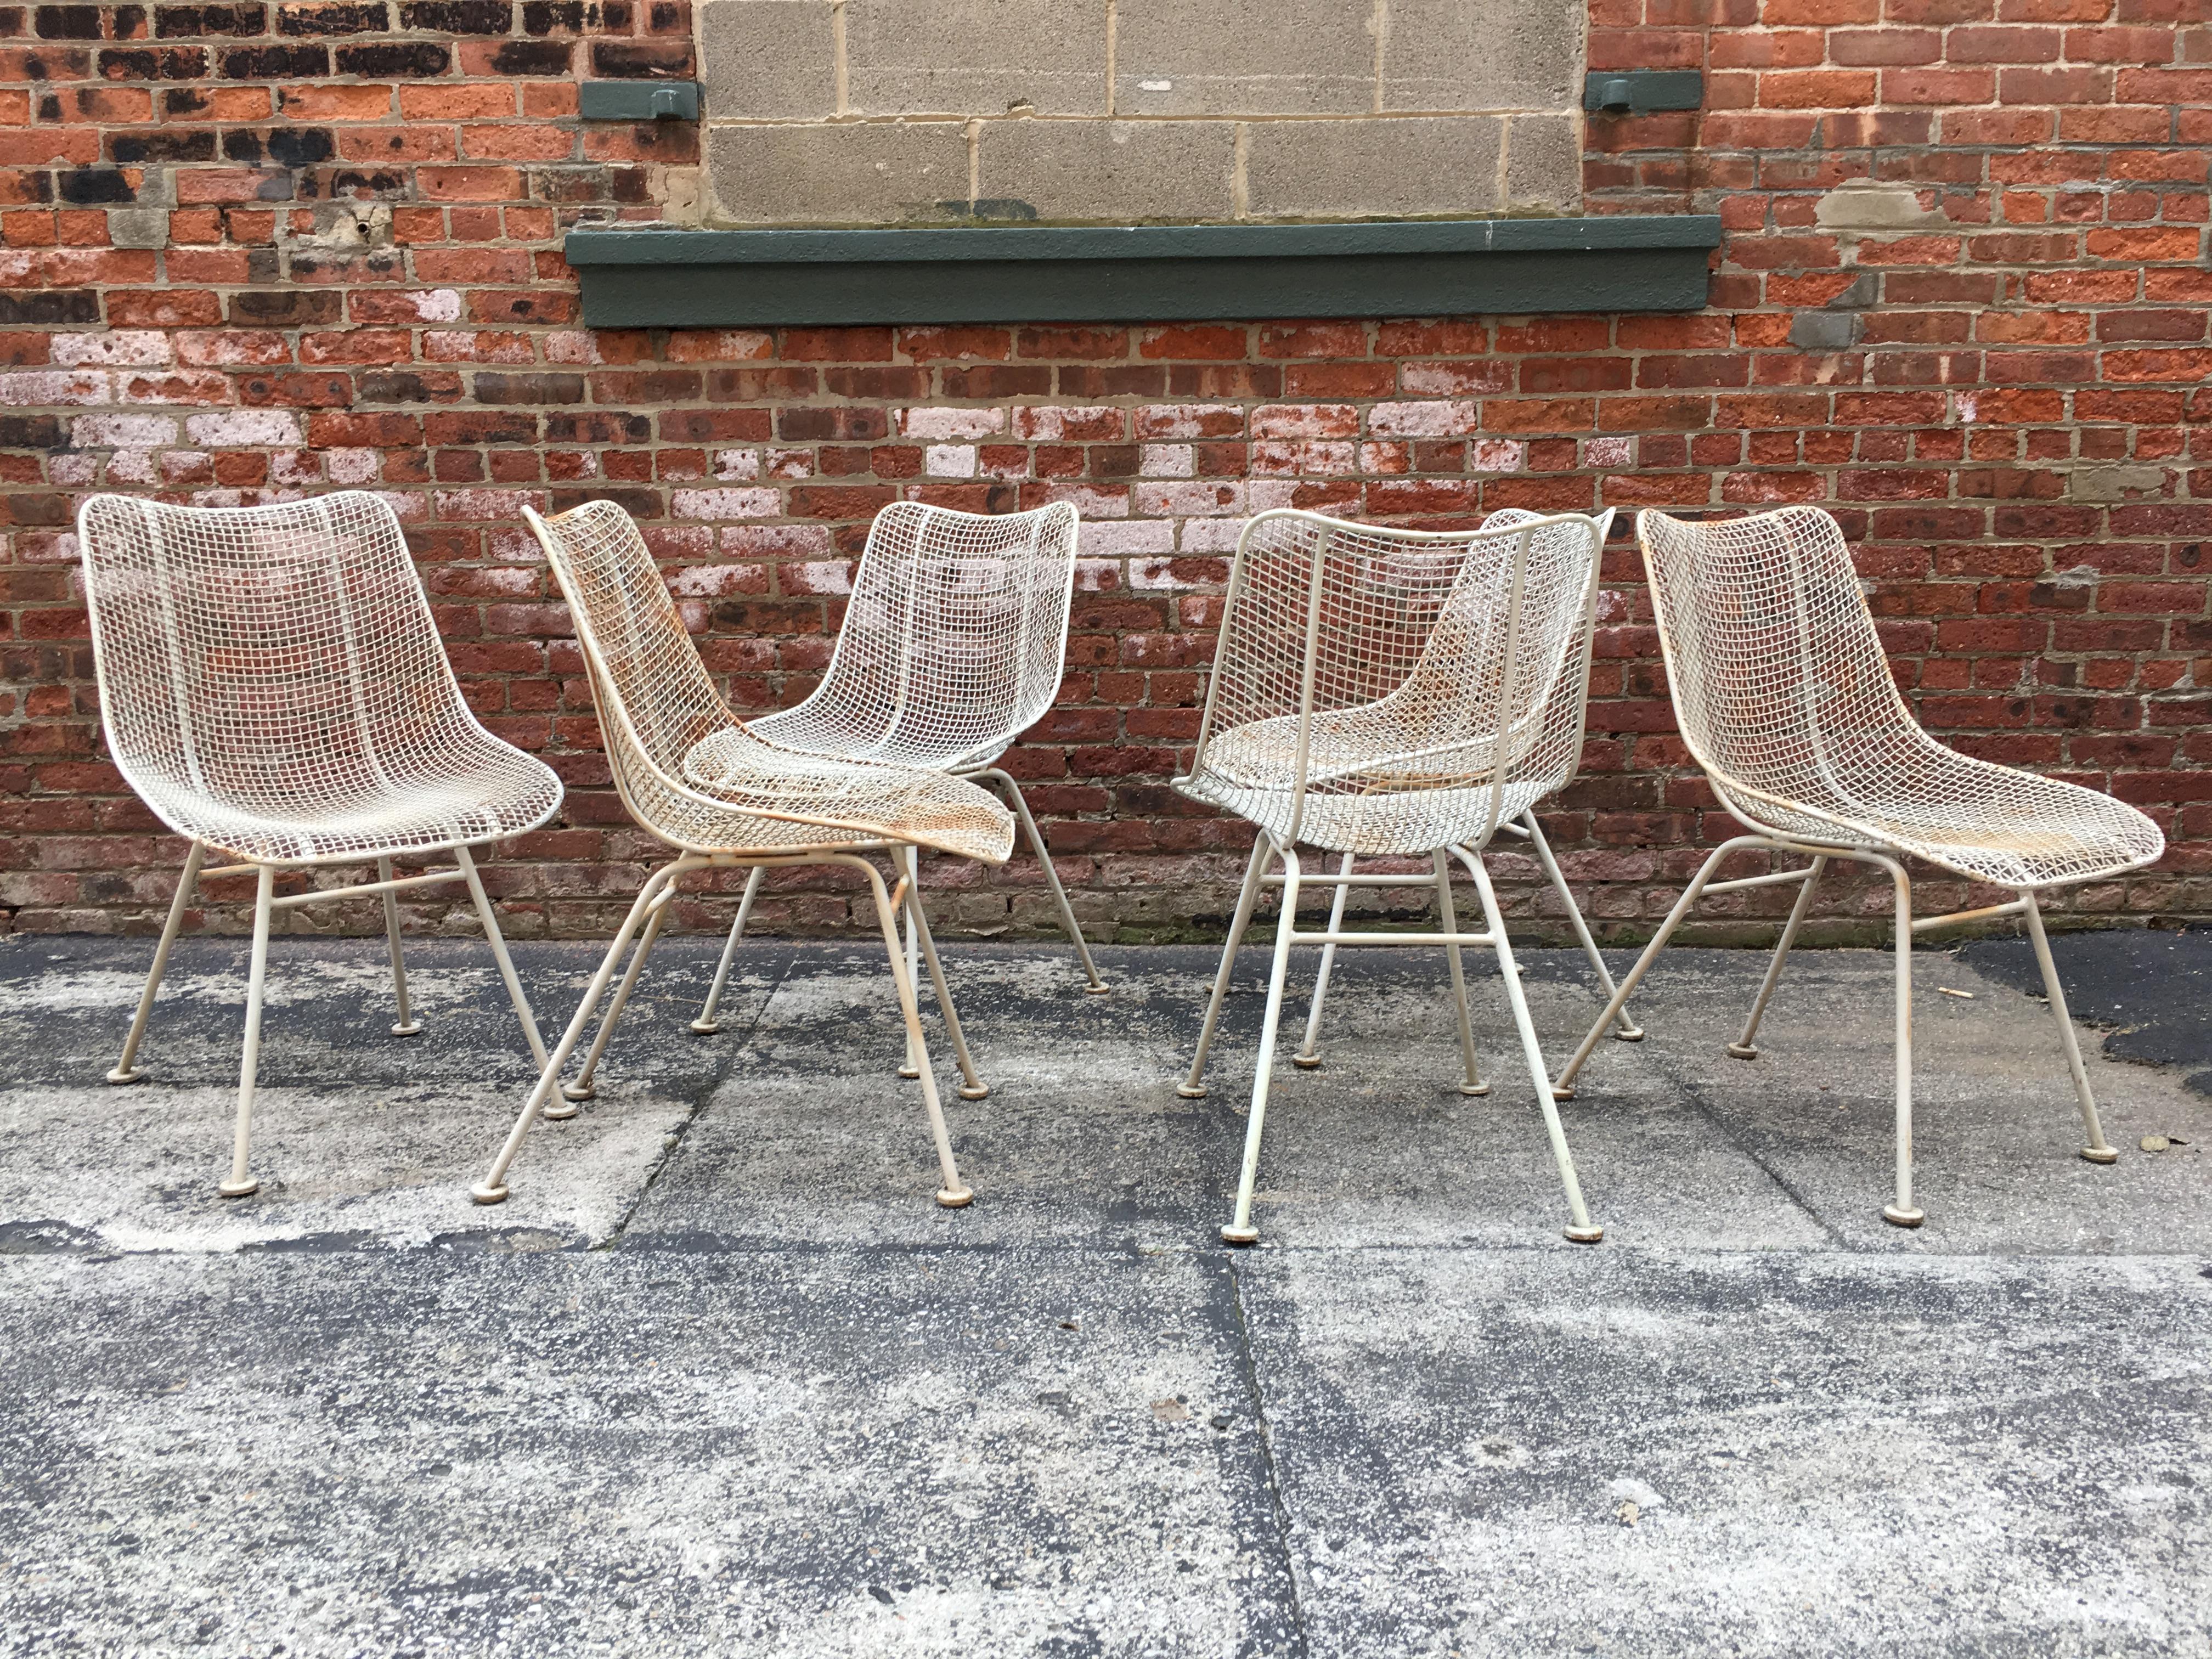 Nice set of six wire mesh Woodard Sculptura side chairs. Original good condition with minor paint loss and some light rust bleed through the paint. Most glides are intact and all the weld contacts are sturdy and durable, circa 1960. Leaving the